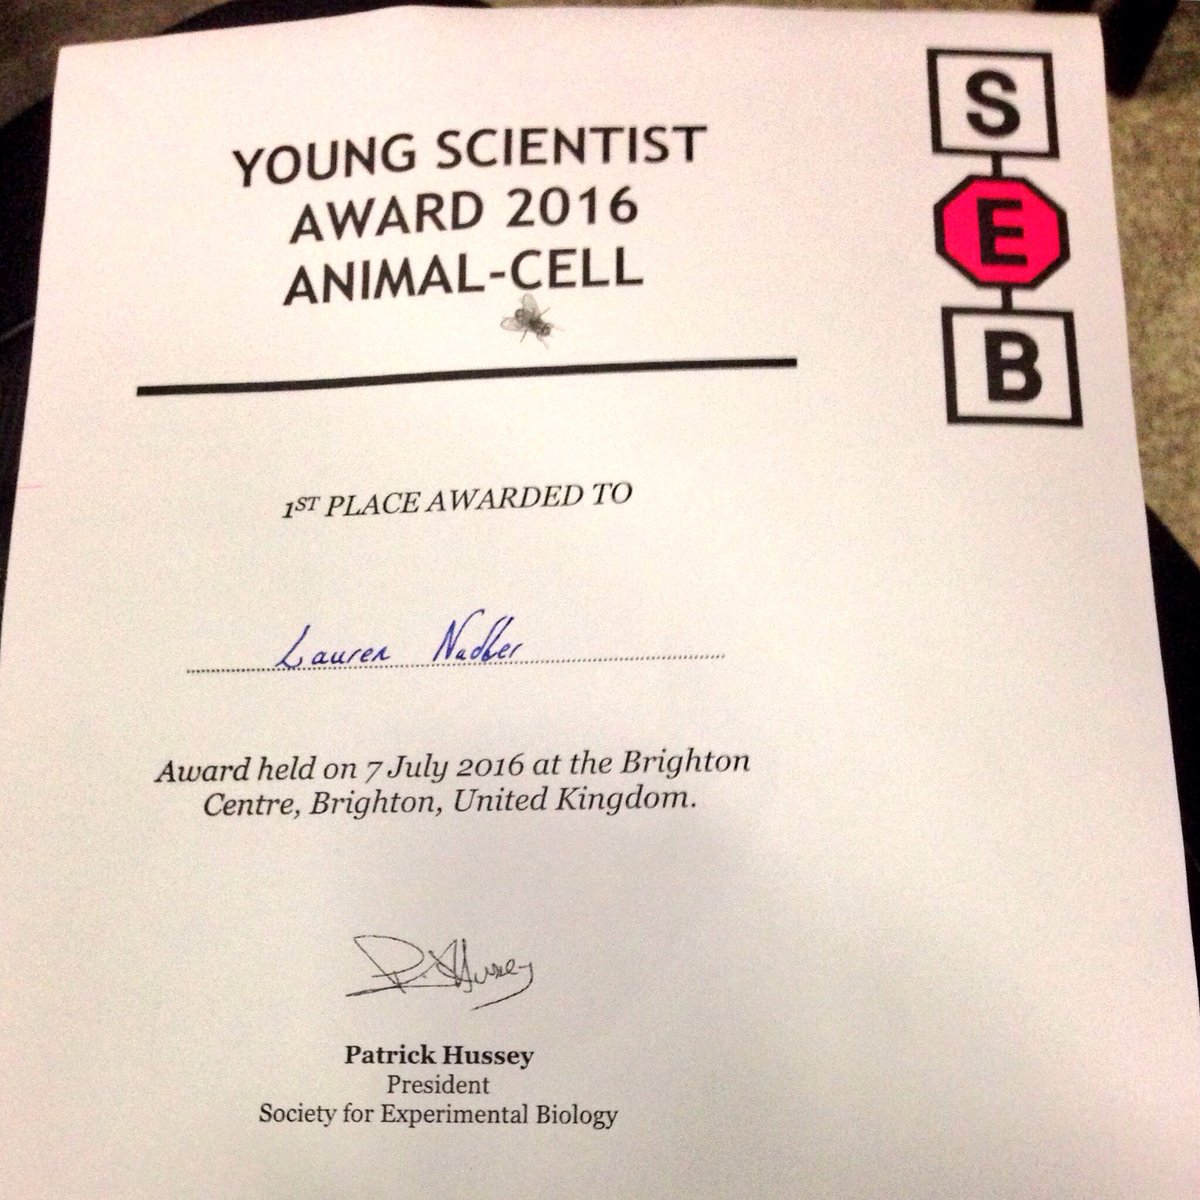 I am excited to be the co-#YoungScientistAward winner this year with @cosimaporteus. Thank you @SEBiology! #SEBAMM